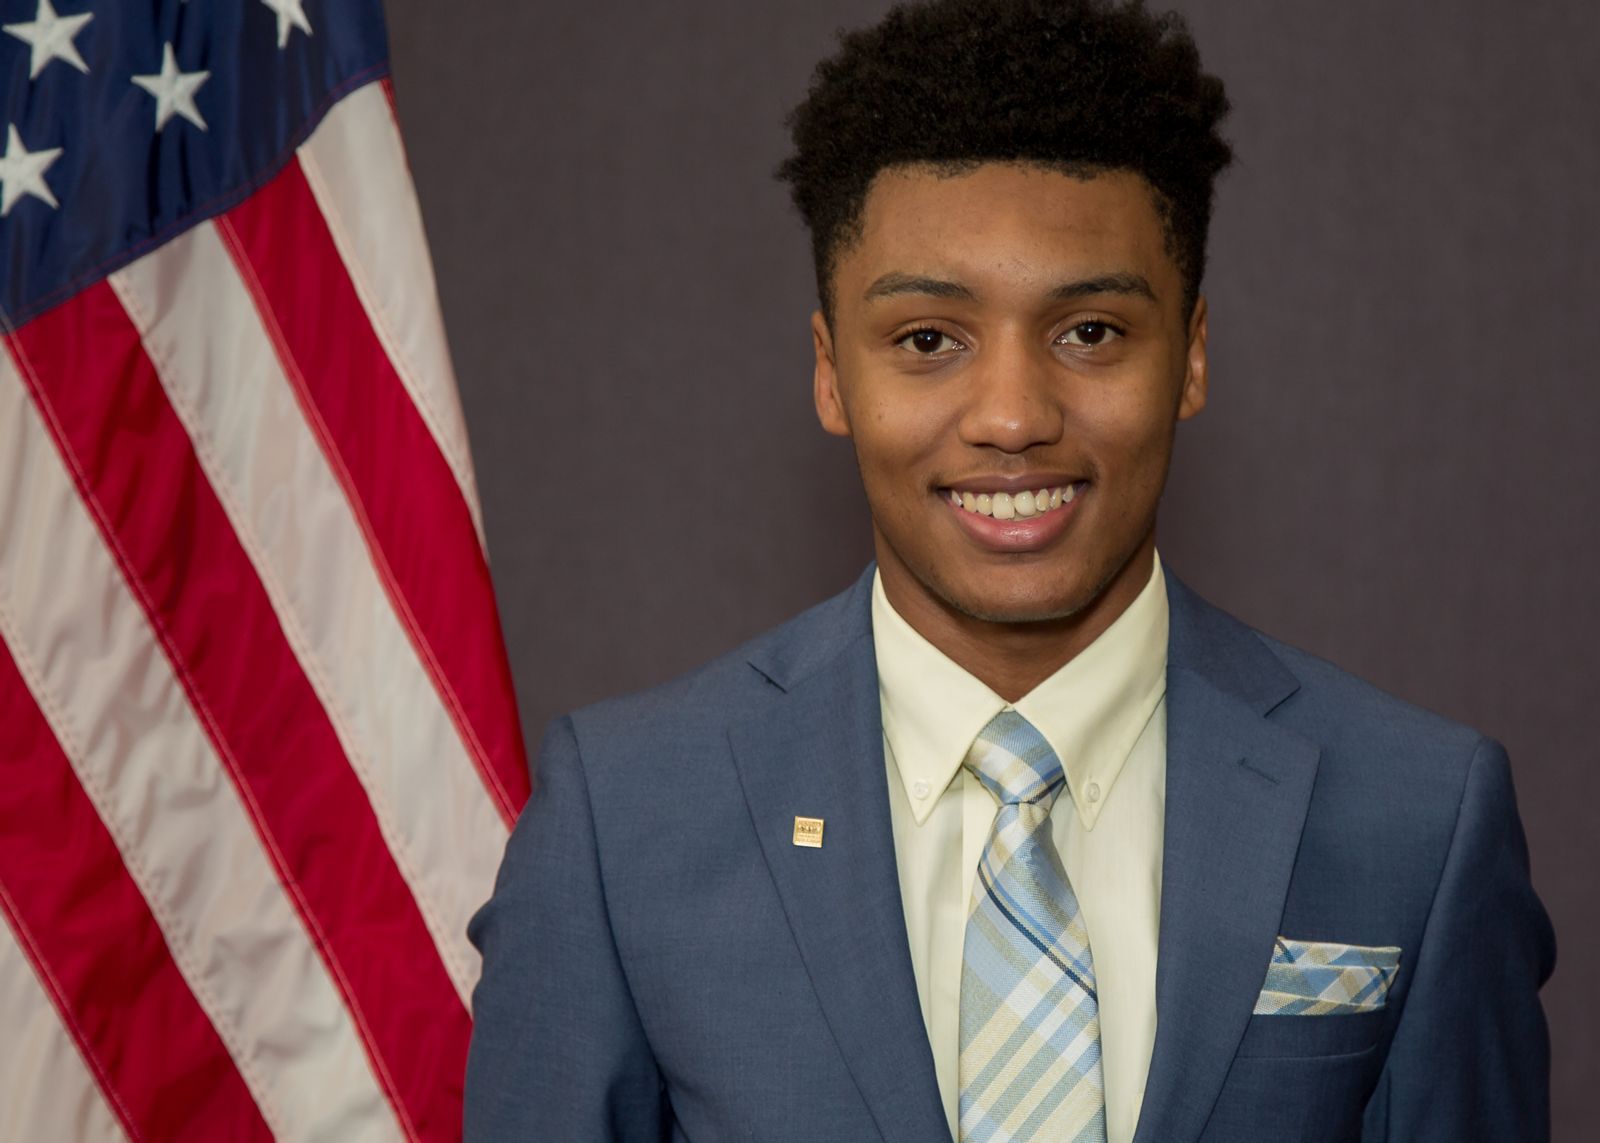 African American college student Rah'Mere Williams, dressed in a navy blue suit with a white collared shirt and light blue striped tie stands in front of and to the right of an American Flag against a grey background.